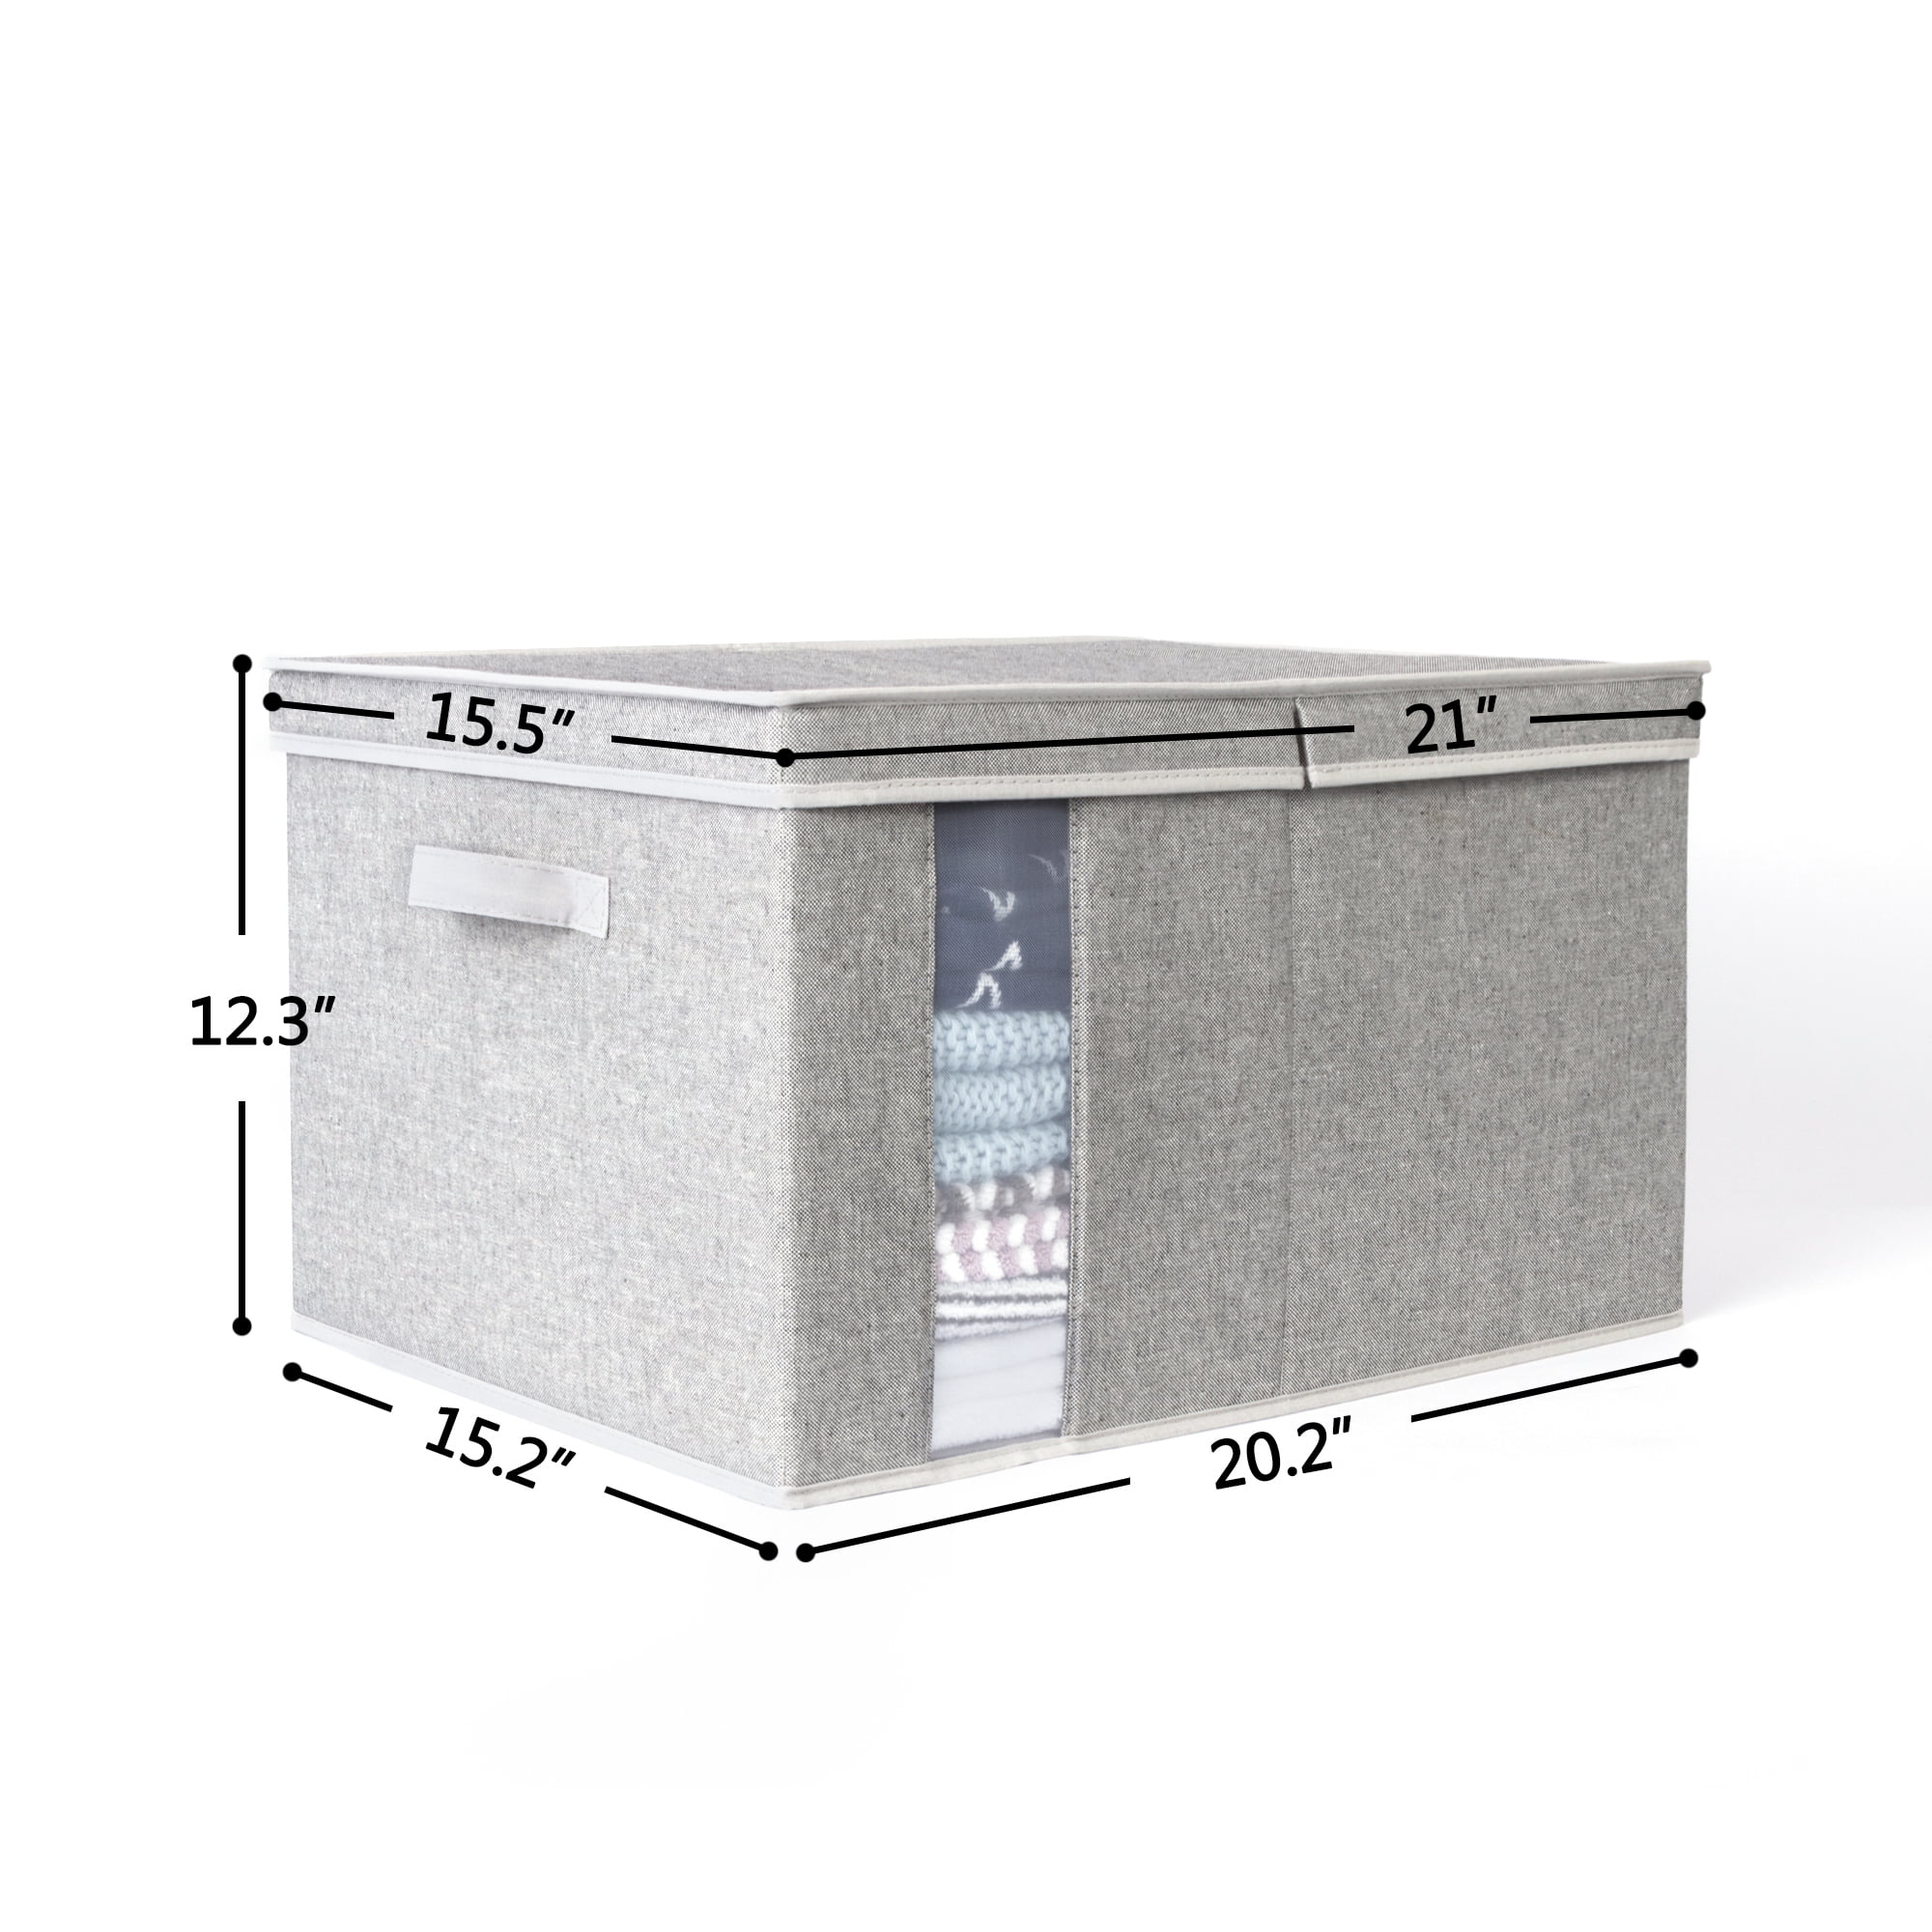 Fabric Storage Box (Without Lid) (Set of 3) Rebrilliant Size: 8.1'' H x 11.6'' W x 12.4'' D, Color: Gray/White